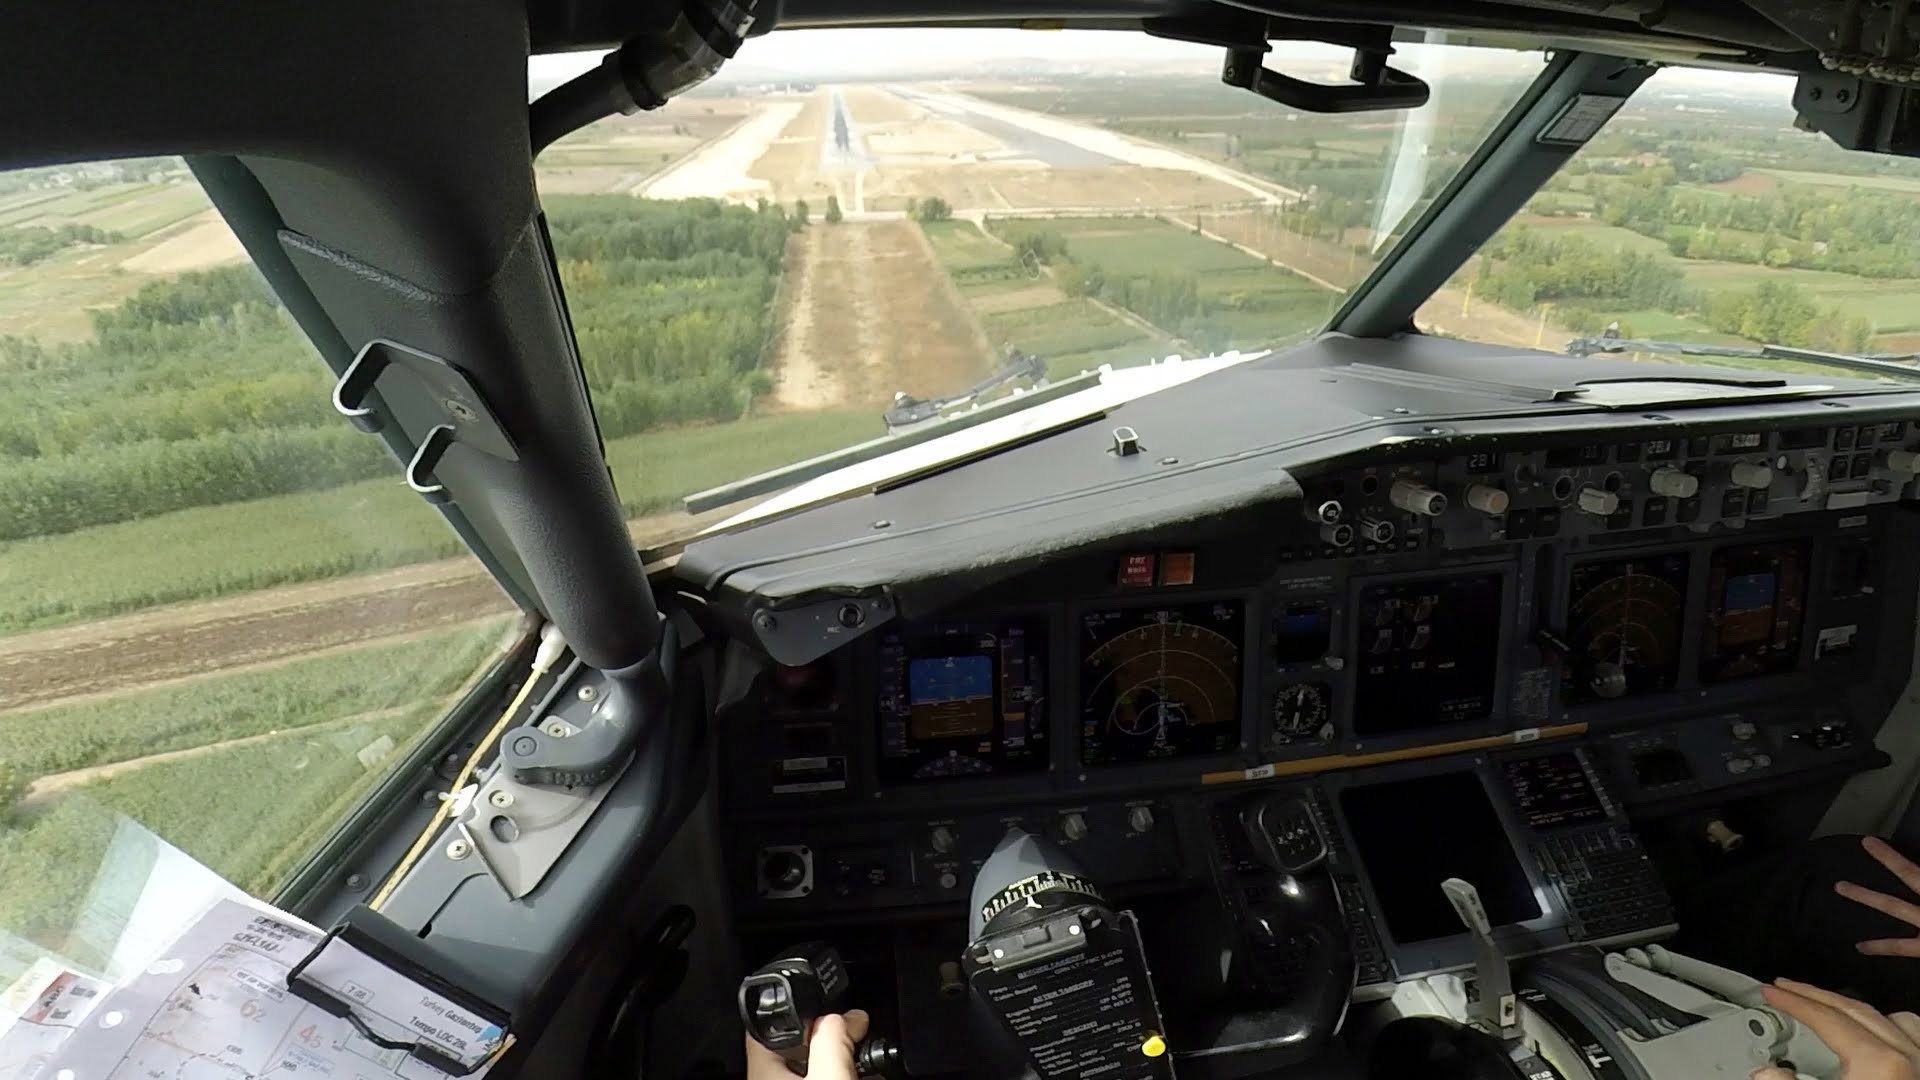 1920x1080 Boeing 737 cockpit view, visual approach (Full HD)